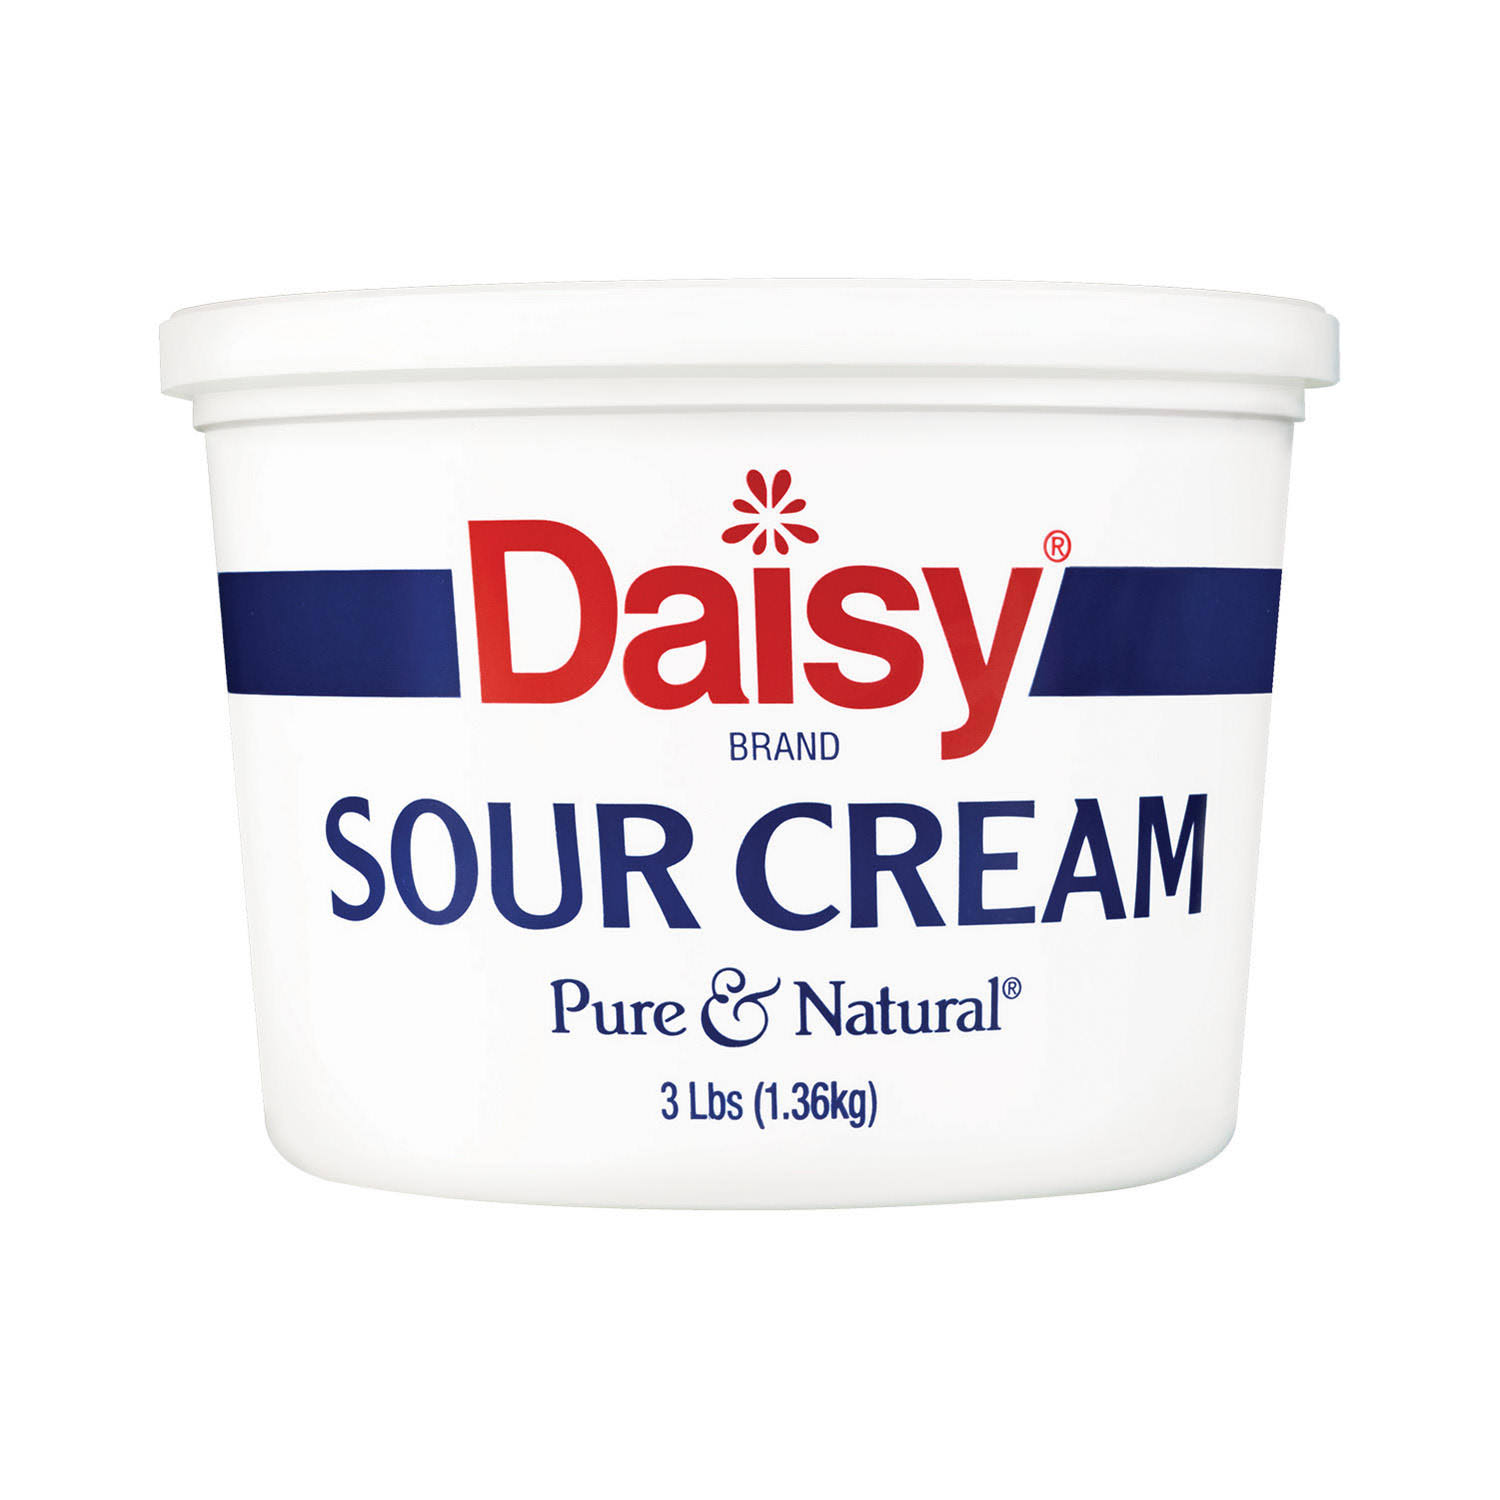 Daisy Pure and Natural Sour Cream - 3lbs